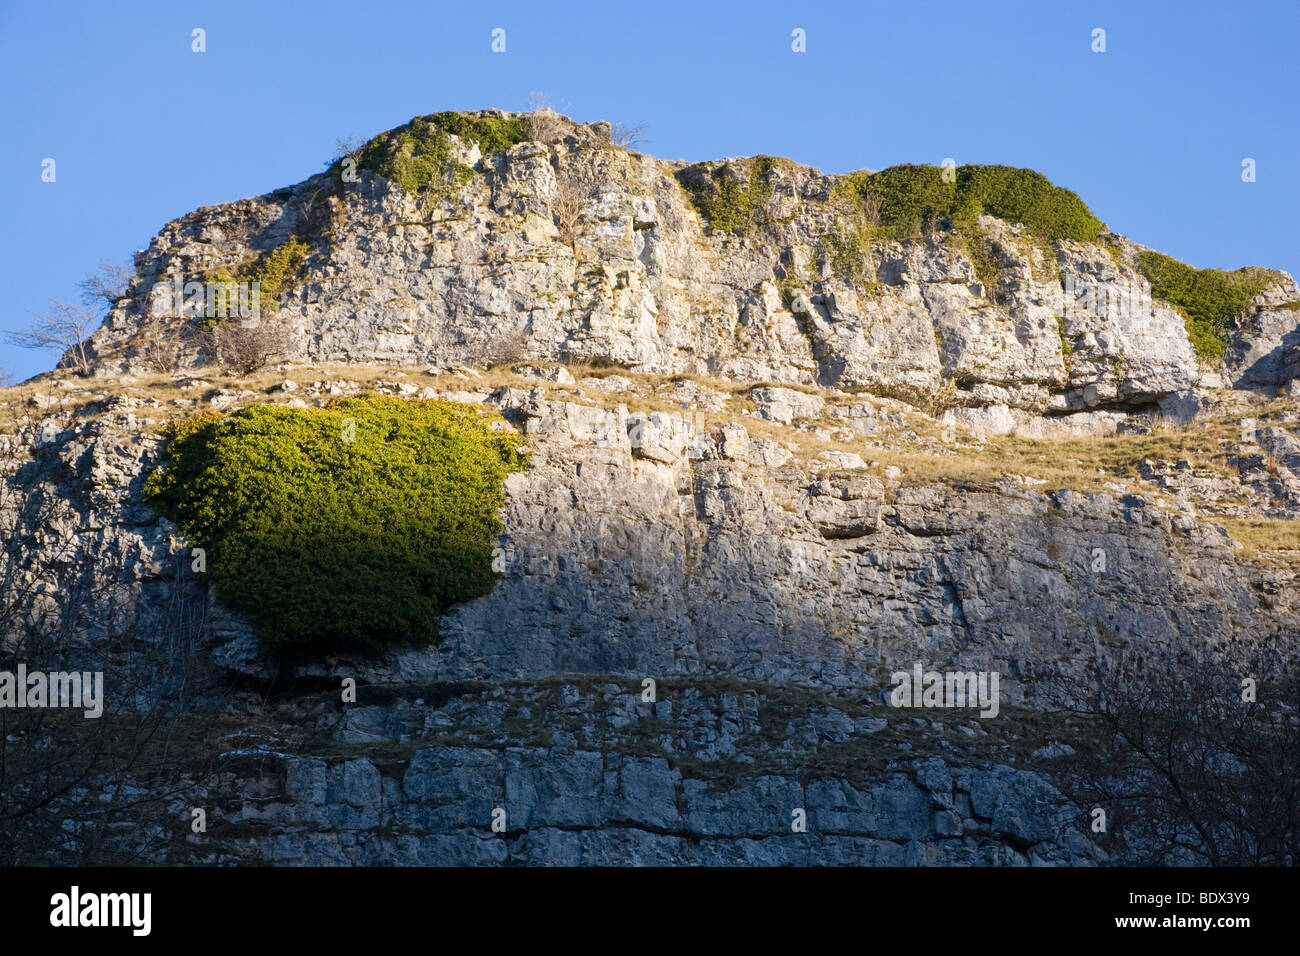 A Limestone Crag against a blue sky above Ricklow Dale at the head of Lathkill Dale in Derbyshire Stock Photo